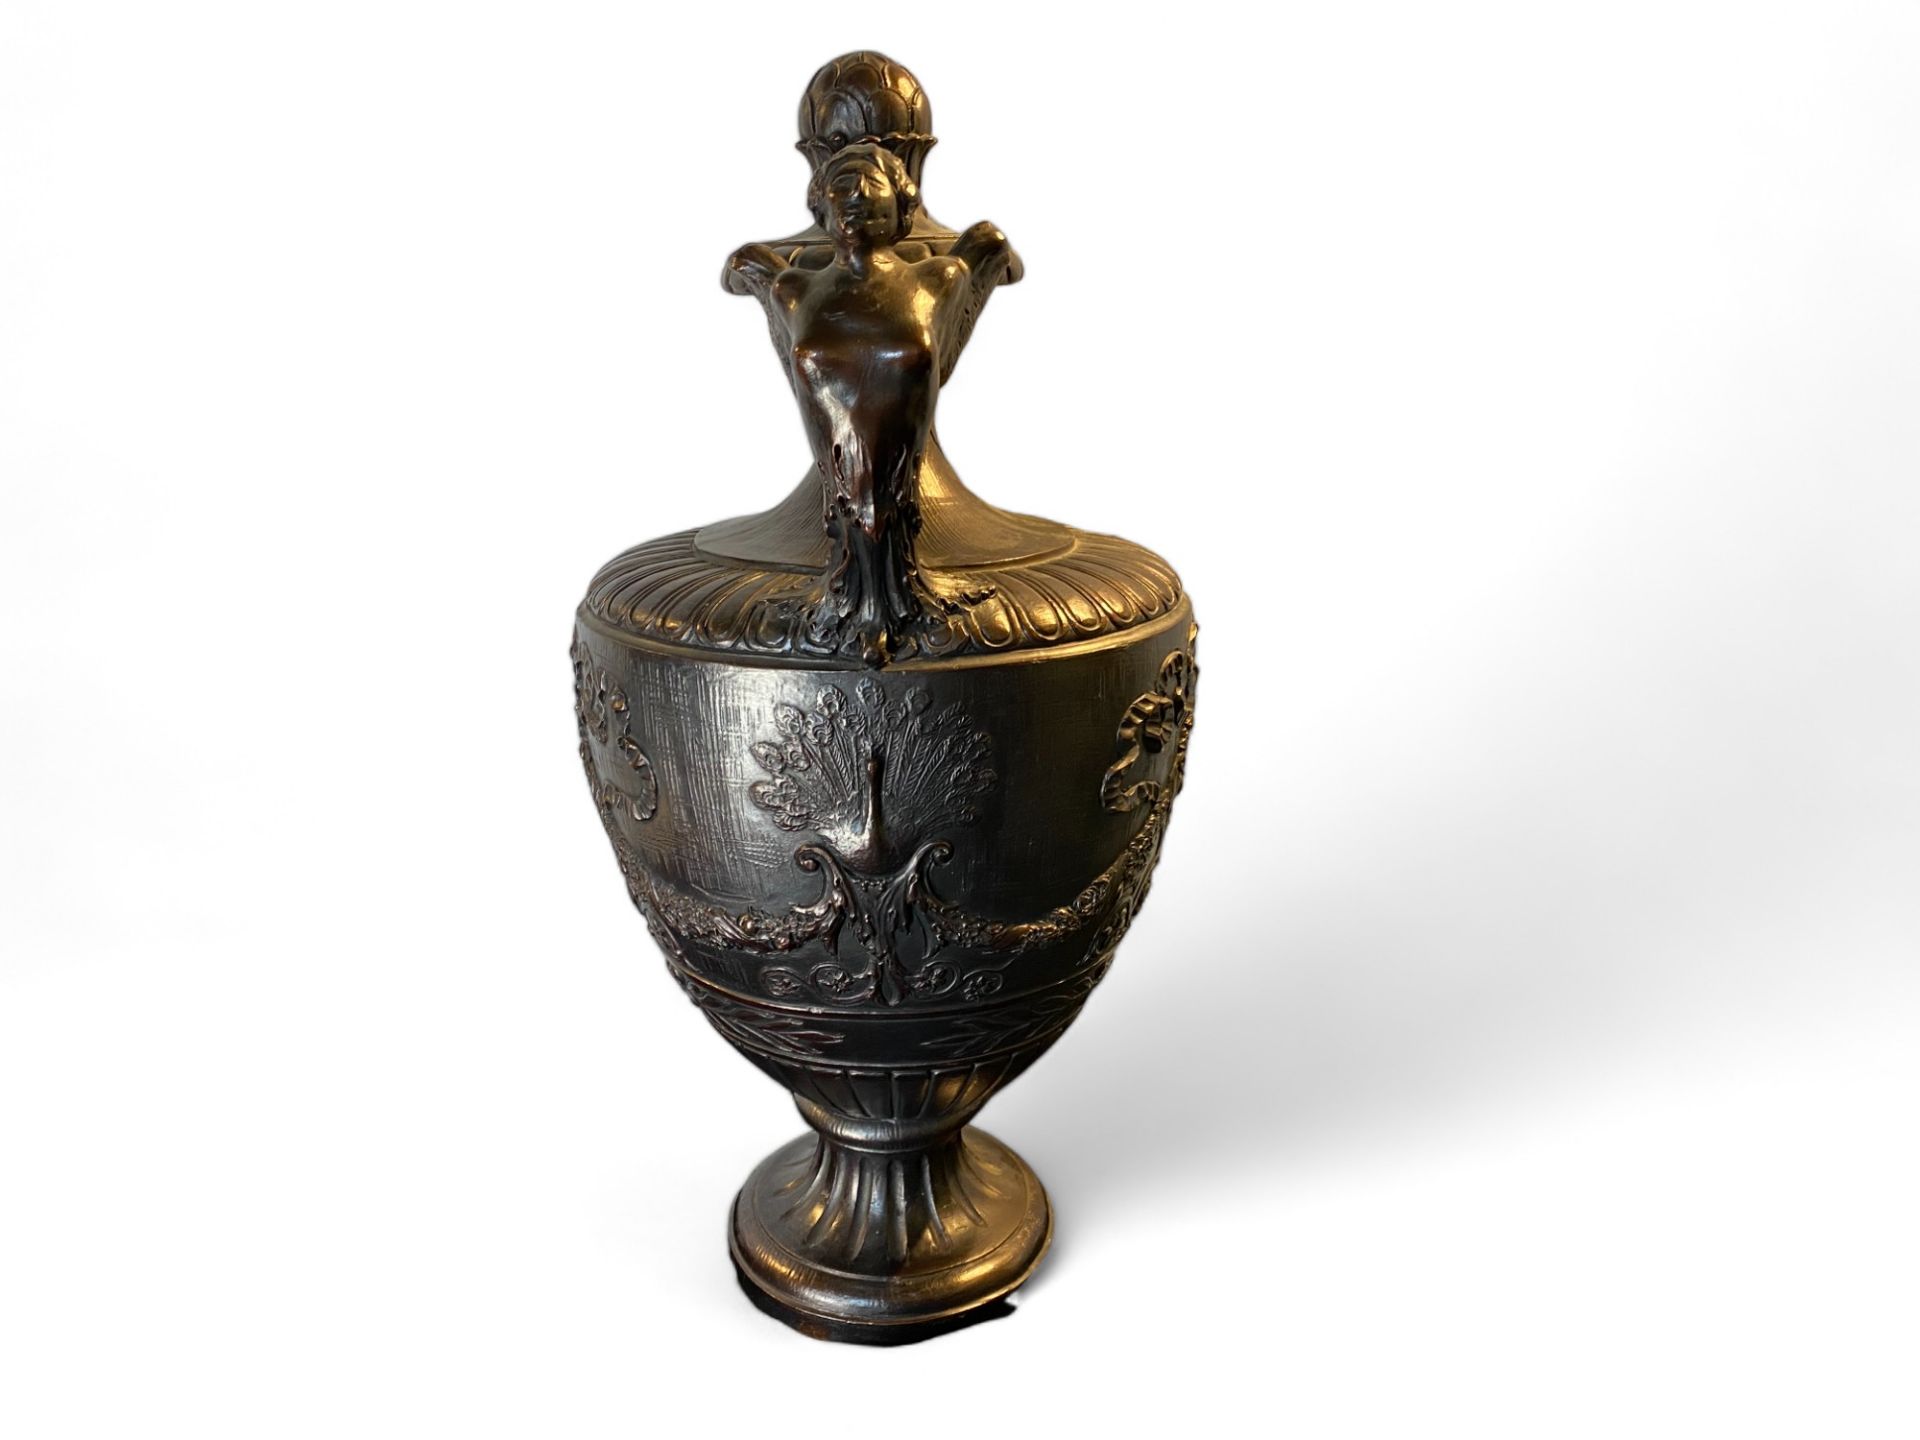 A large early 20th century terracotta classical twin handled urn with a metallic bronzed glaze - Image 4 of 7